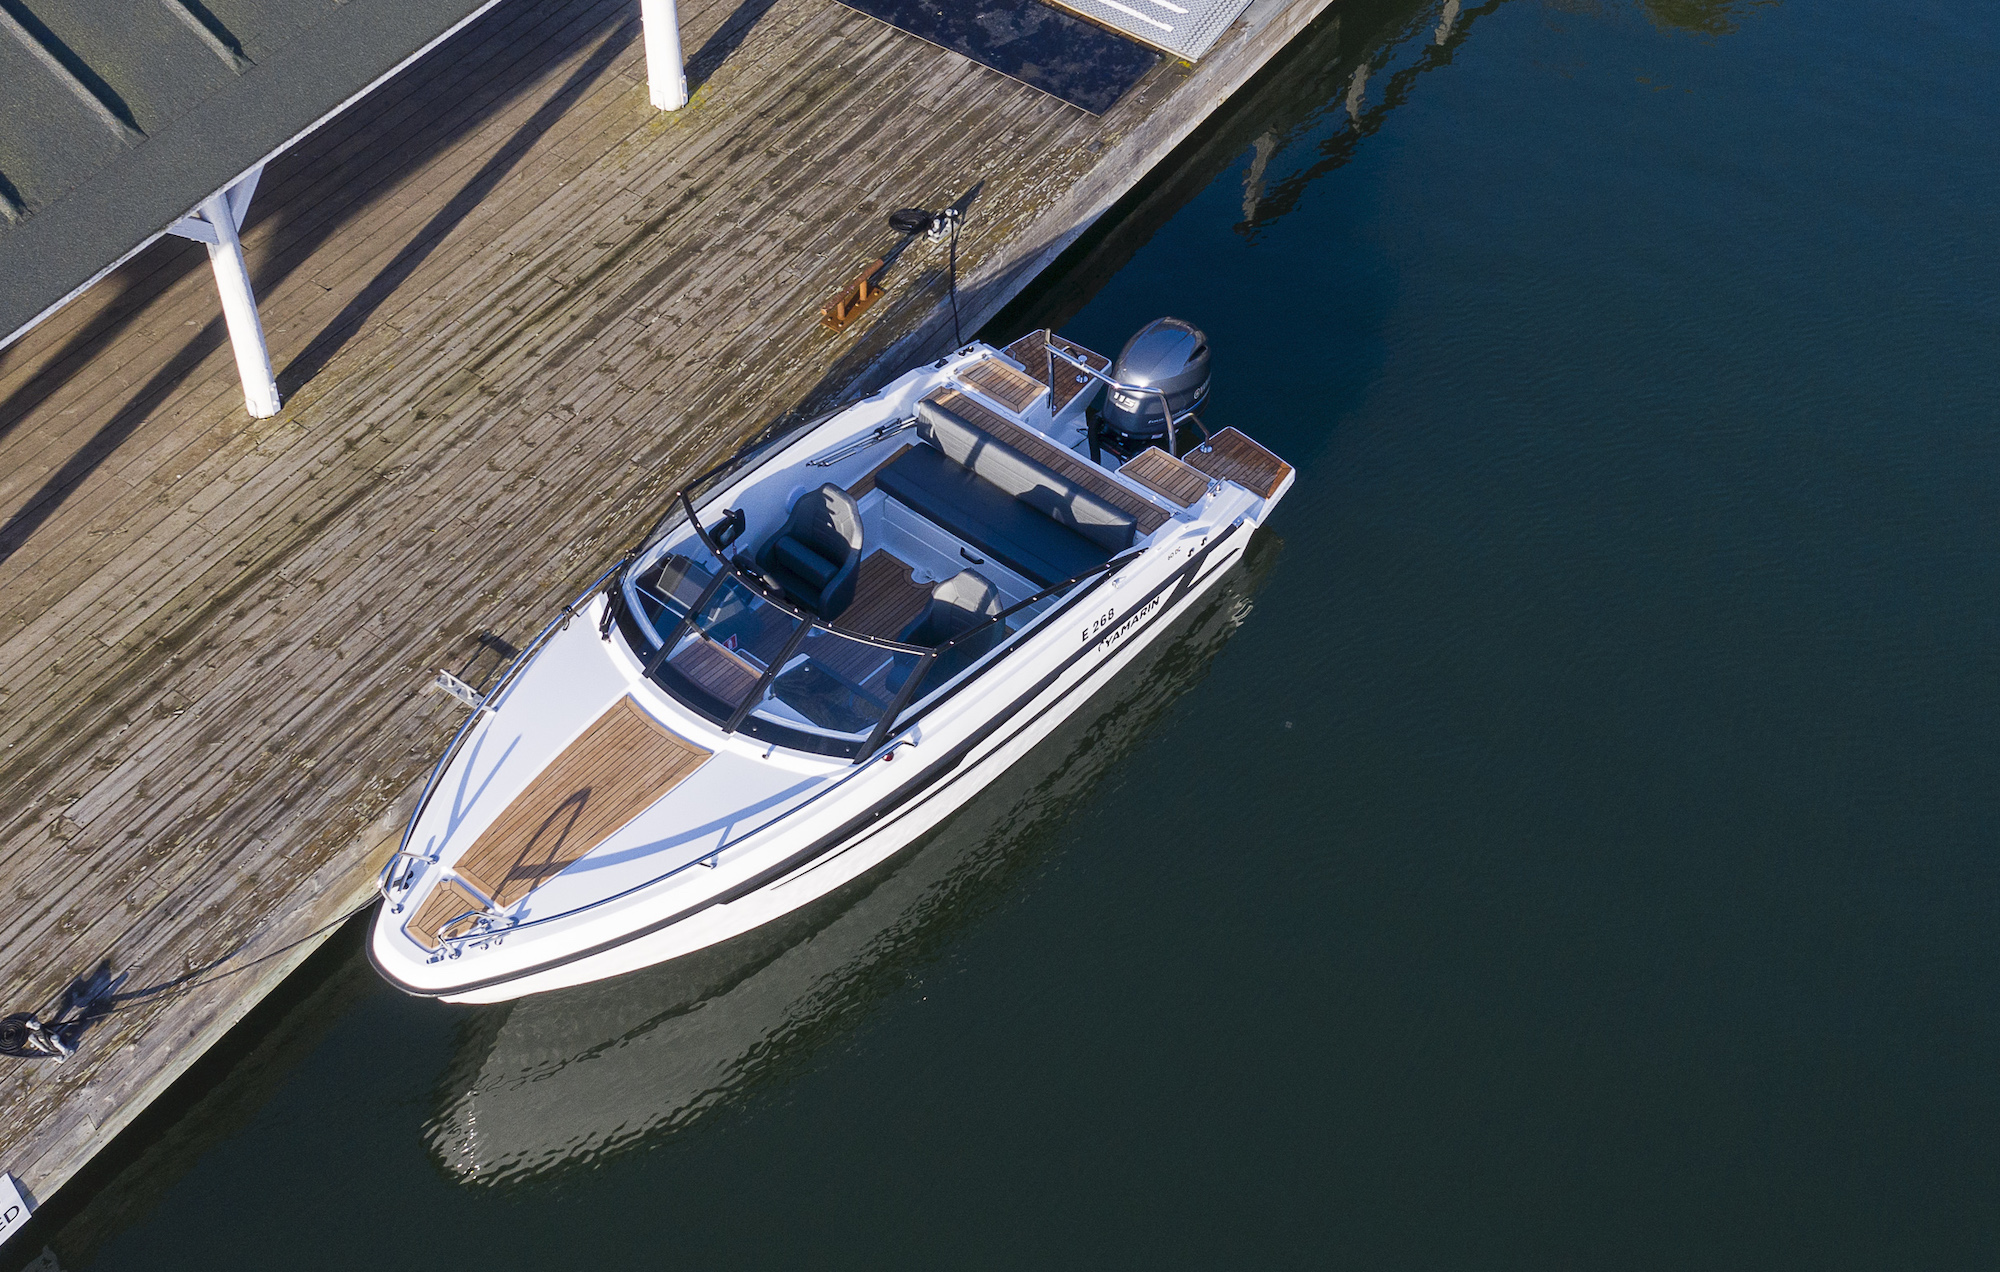 Yamarin 60 DC will be displayed at the Tallinn Boat Show 2020